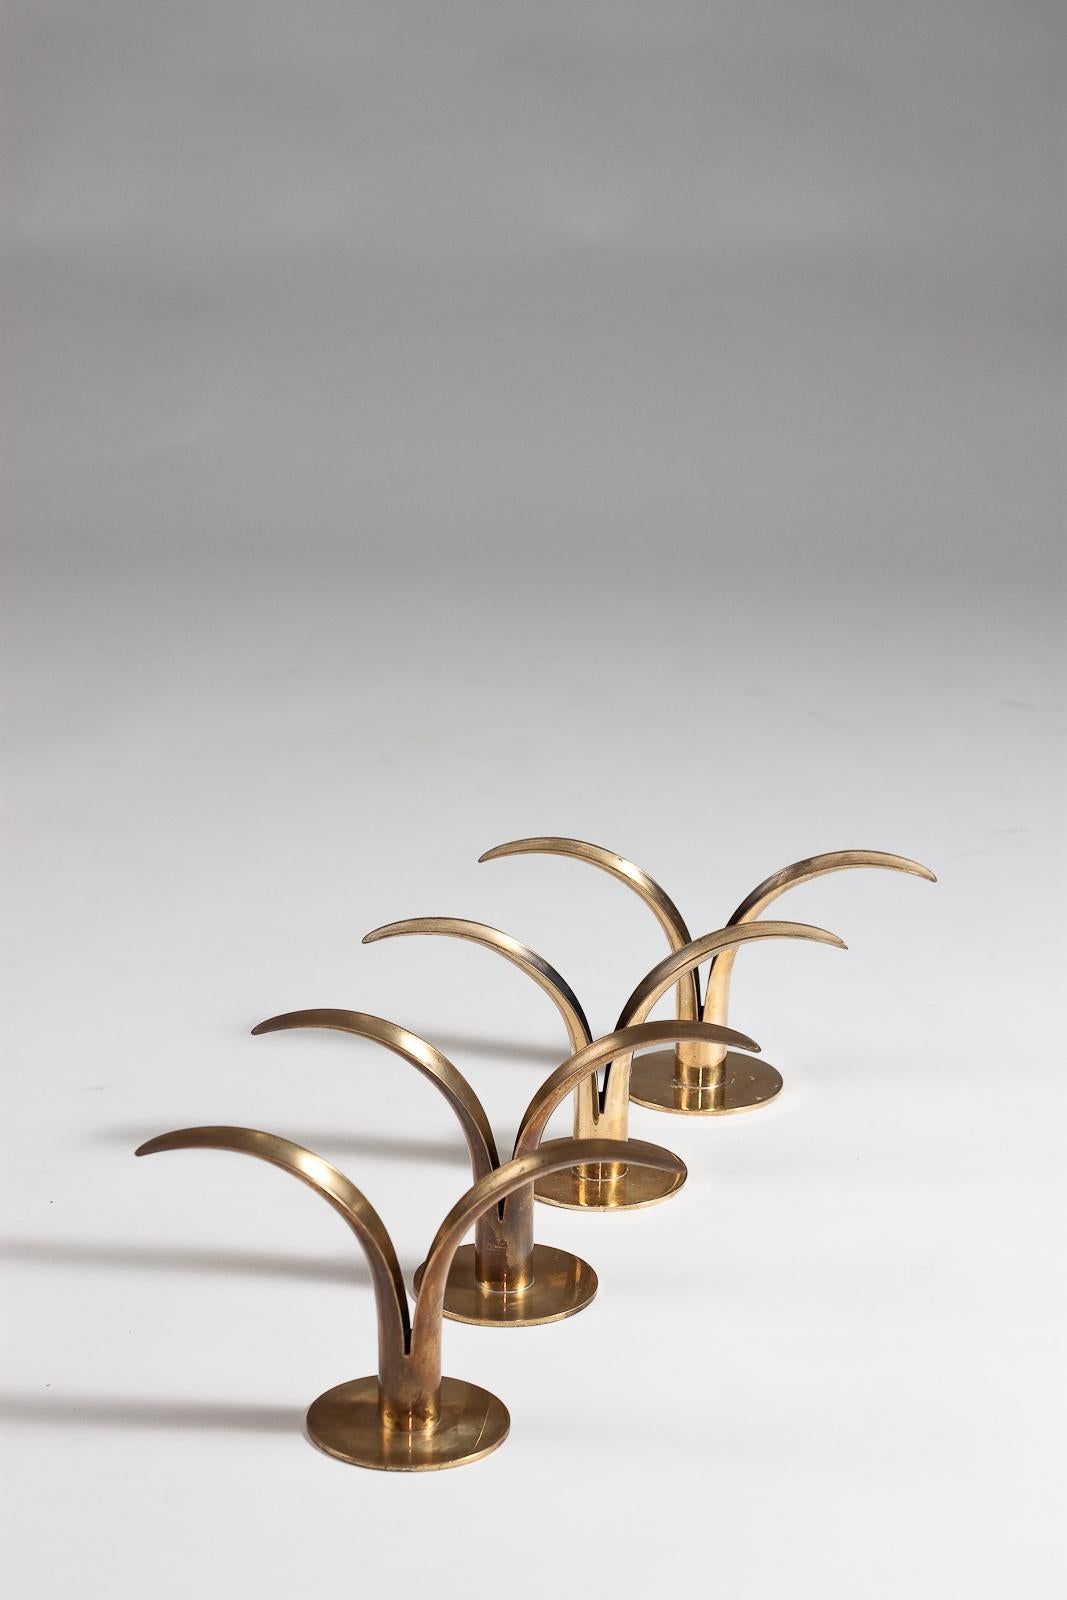 Add a touch of vintage elegance to your home with this set of 4 Liljan brass candlesticks from the 1940's. Designed by Ivar Ålenius Björk for Ystad Metall, these candlesticks are a true representation of Scandinavian interior design. The sleek and